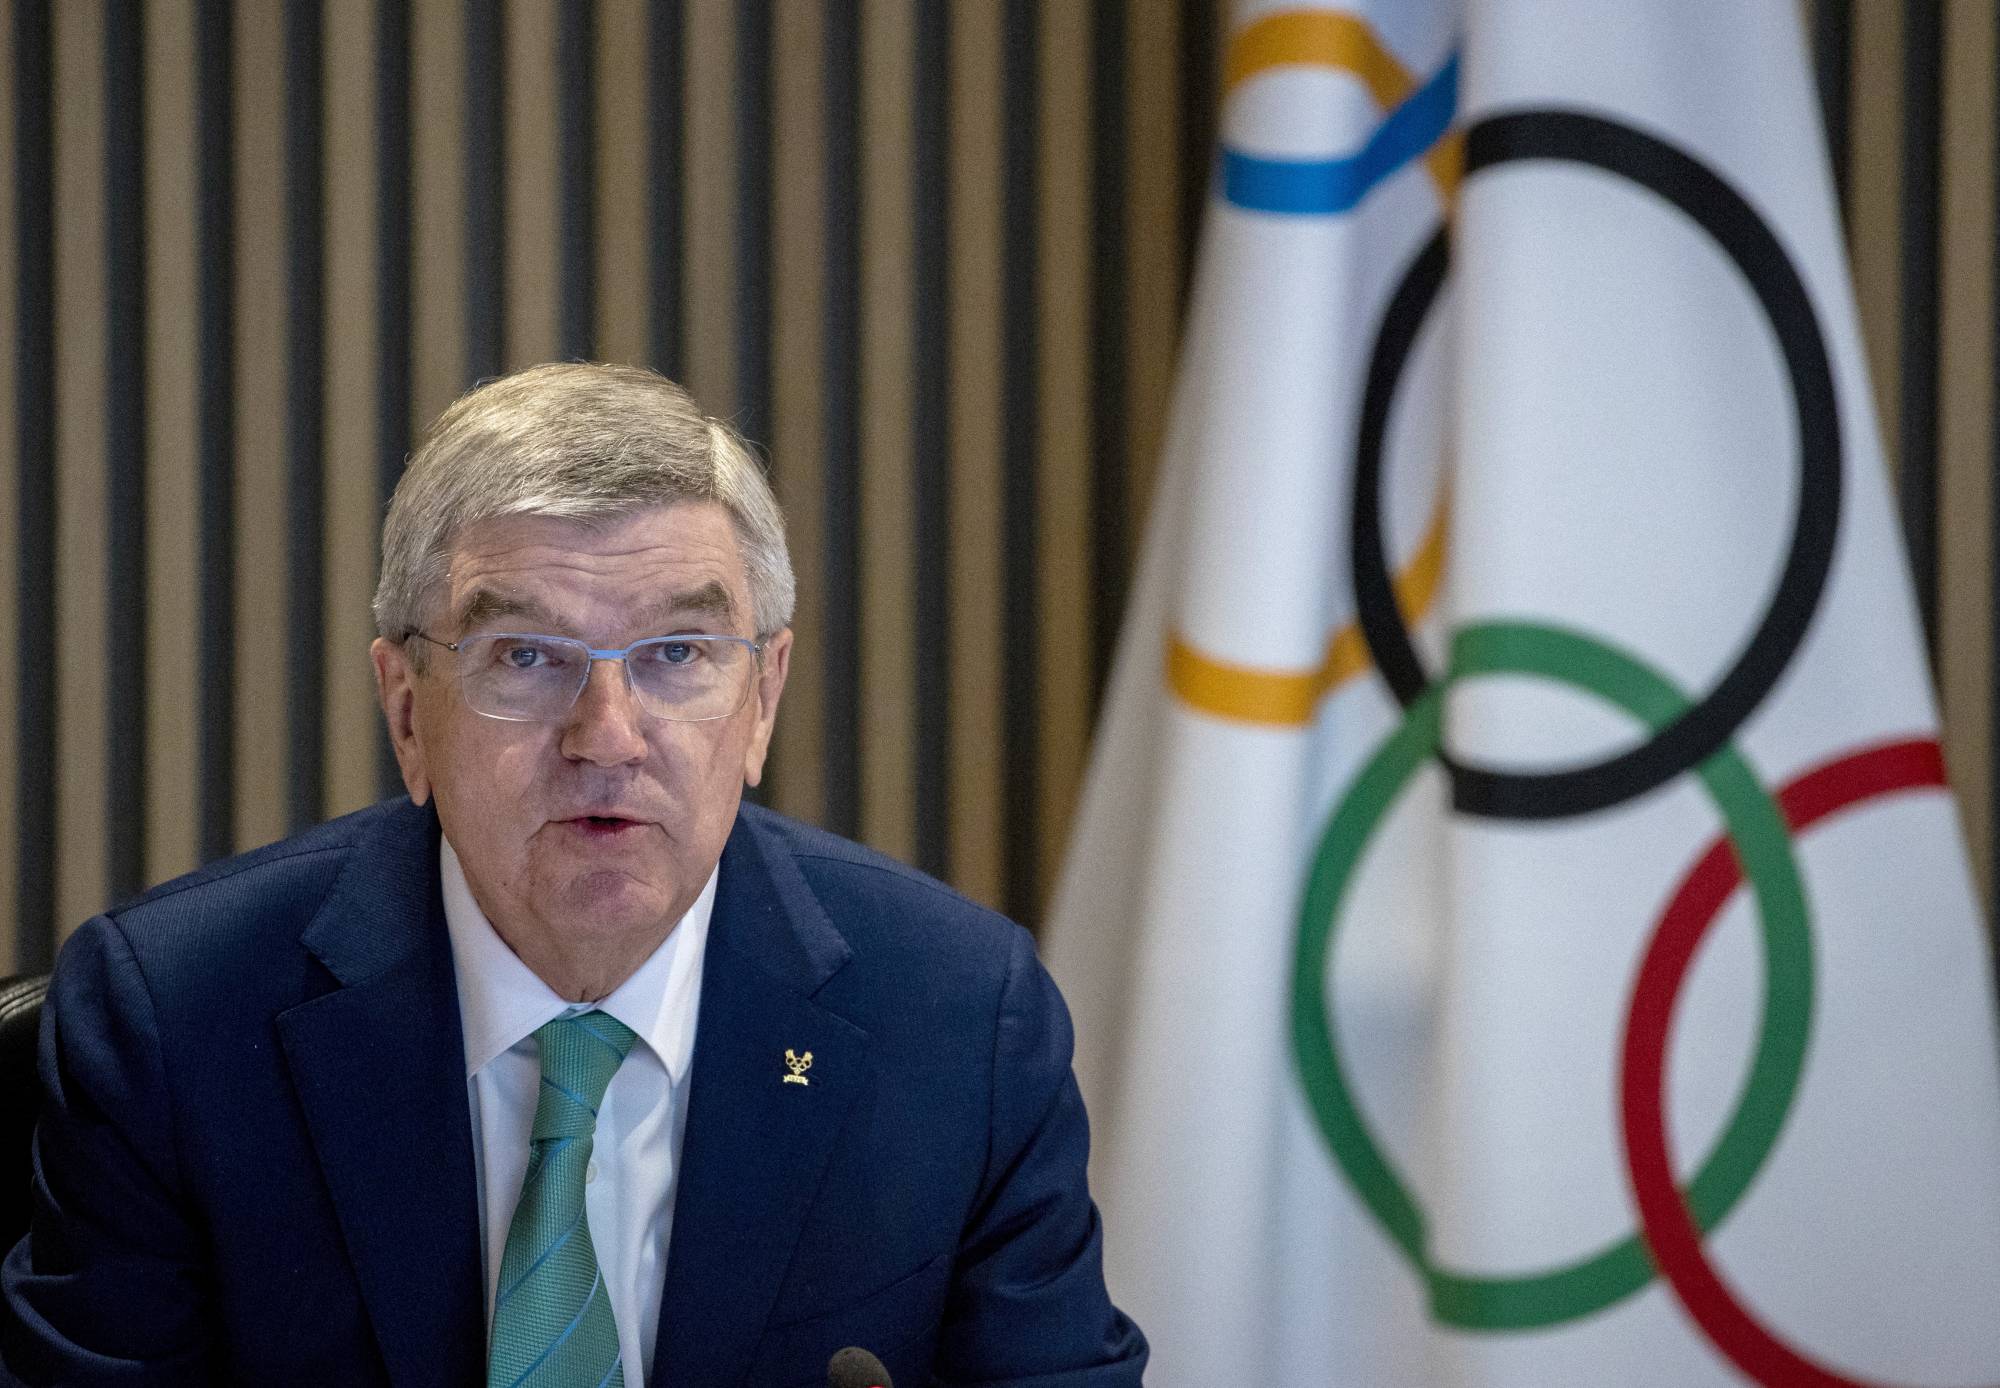 IOC President Thomas Bach attends an Executive Board meaning at the  Olympic House in Lausanne, Switzerland, on Dec. 5. | REUTERS